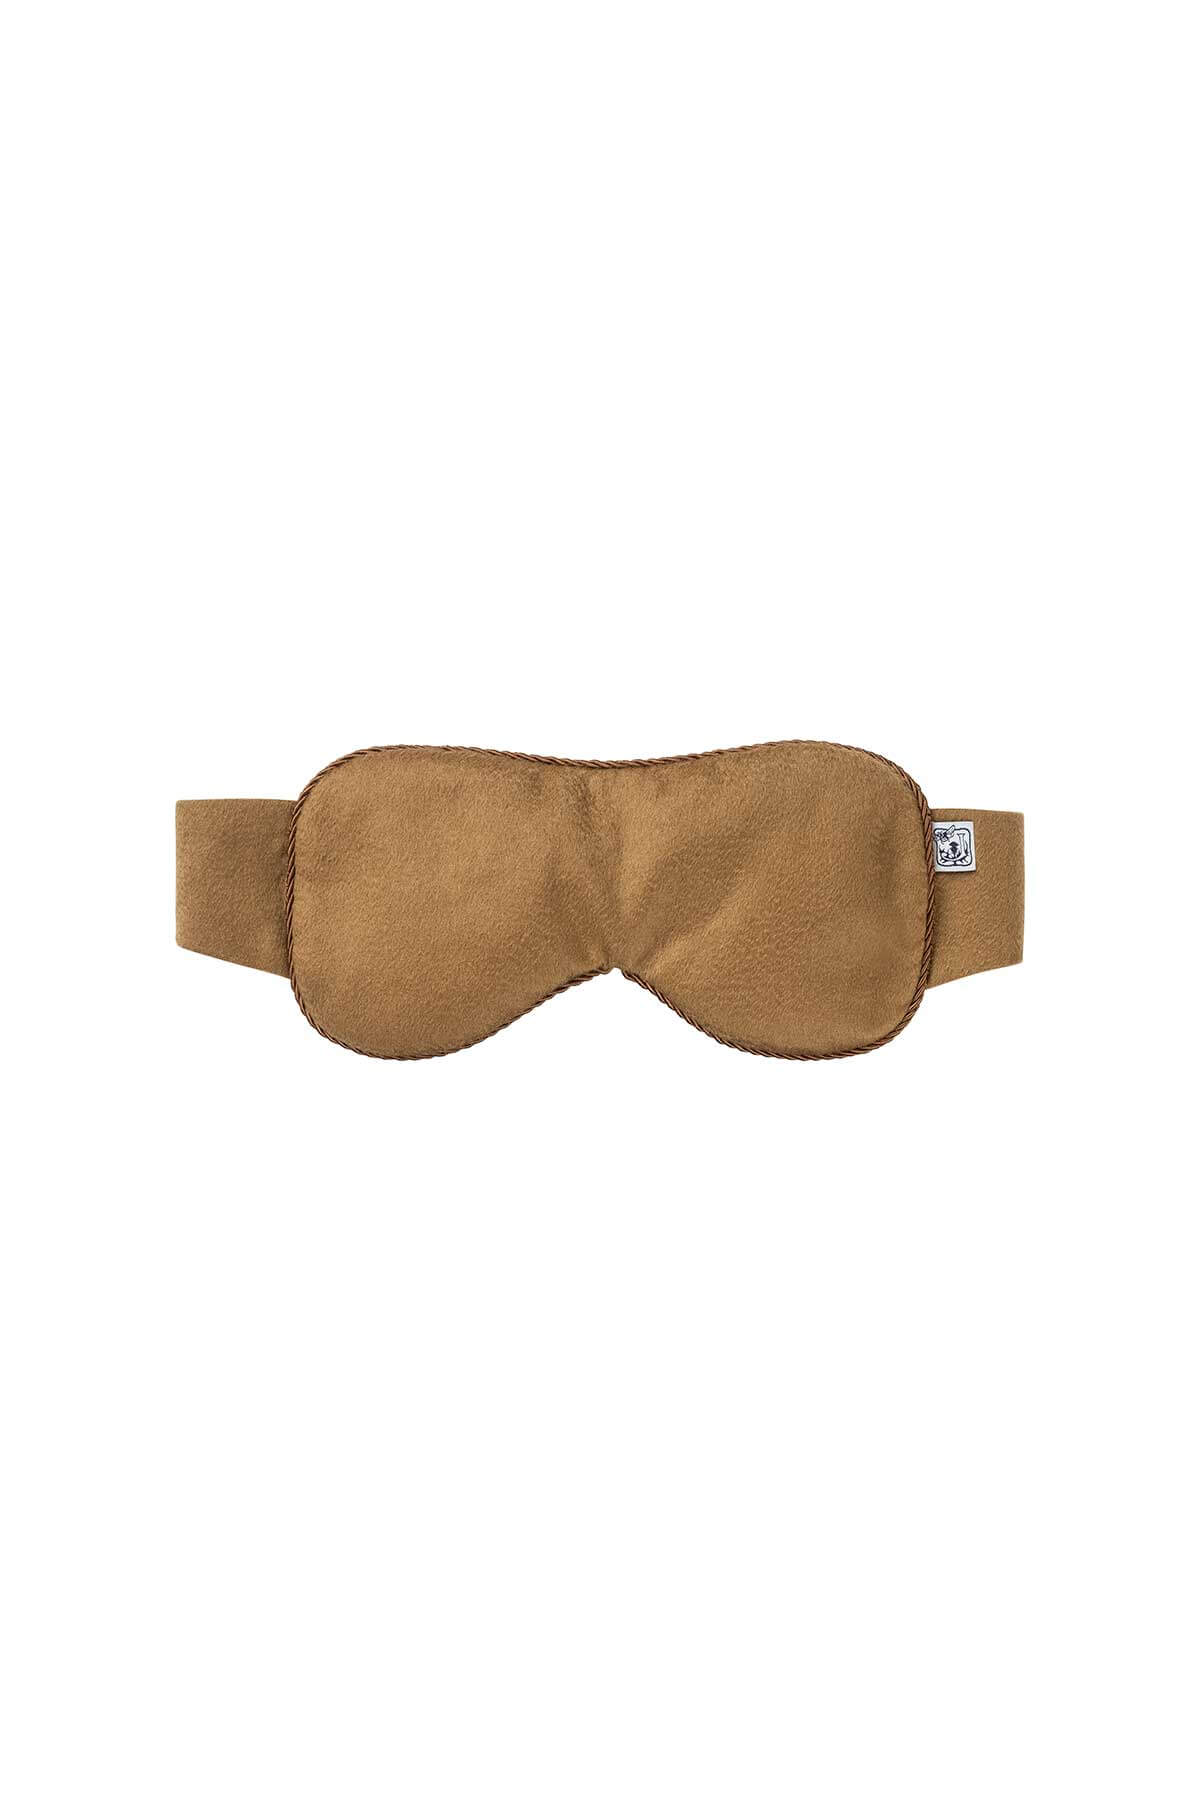 Johnstons of Elgin  Luxury Cashmere Travel Eye Mask in Camel on a white background PA0000947310ONE